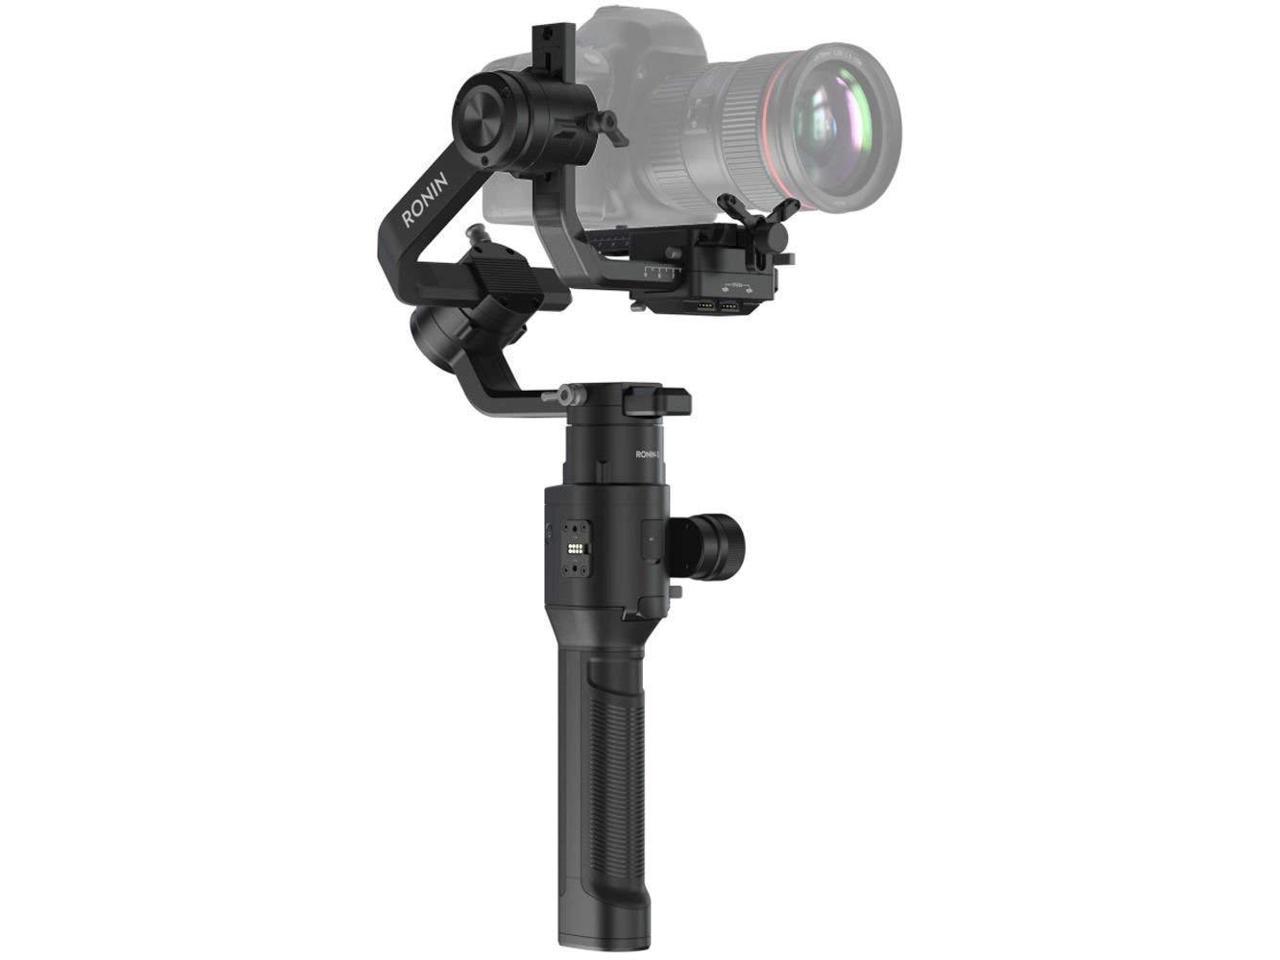 DJI Ronin-S Handheld 3-Axis Gimbal Stabilizer All-in-one Control DSLR Mirrorless Cameras